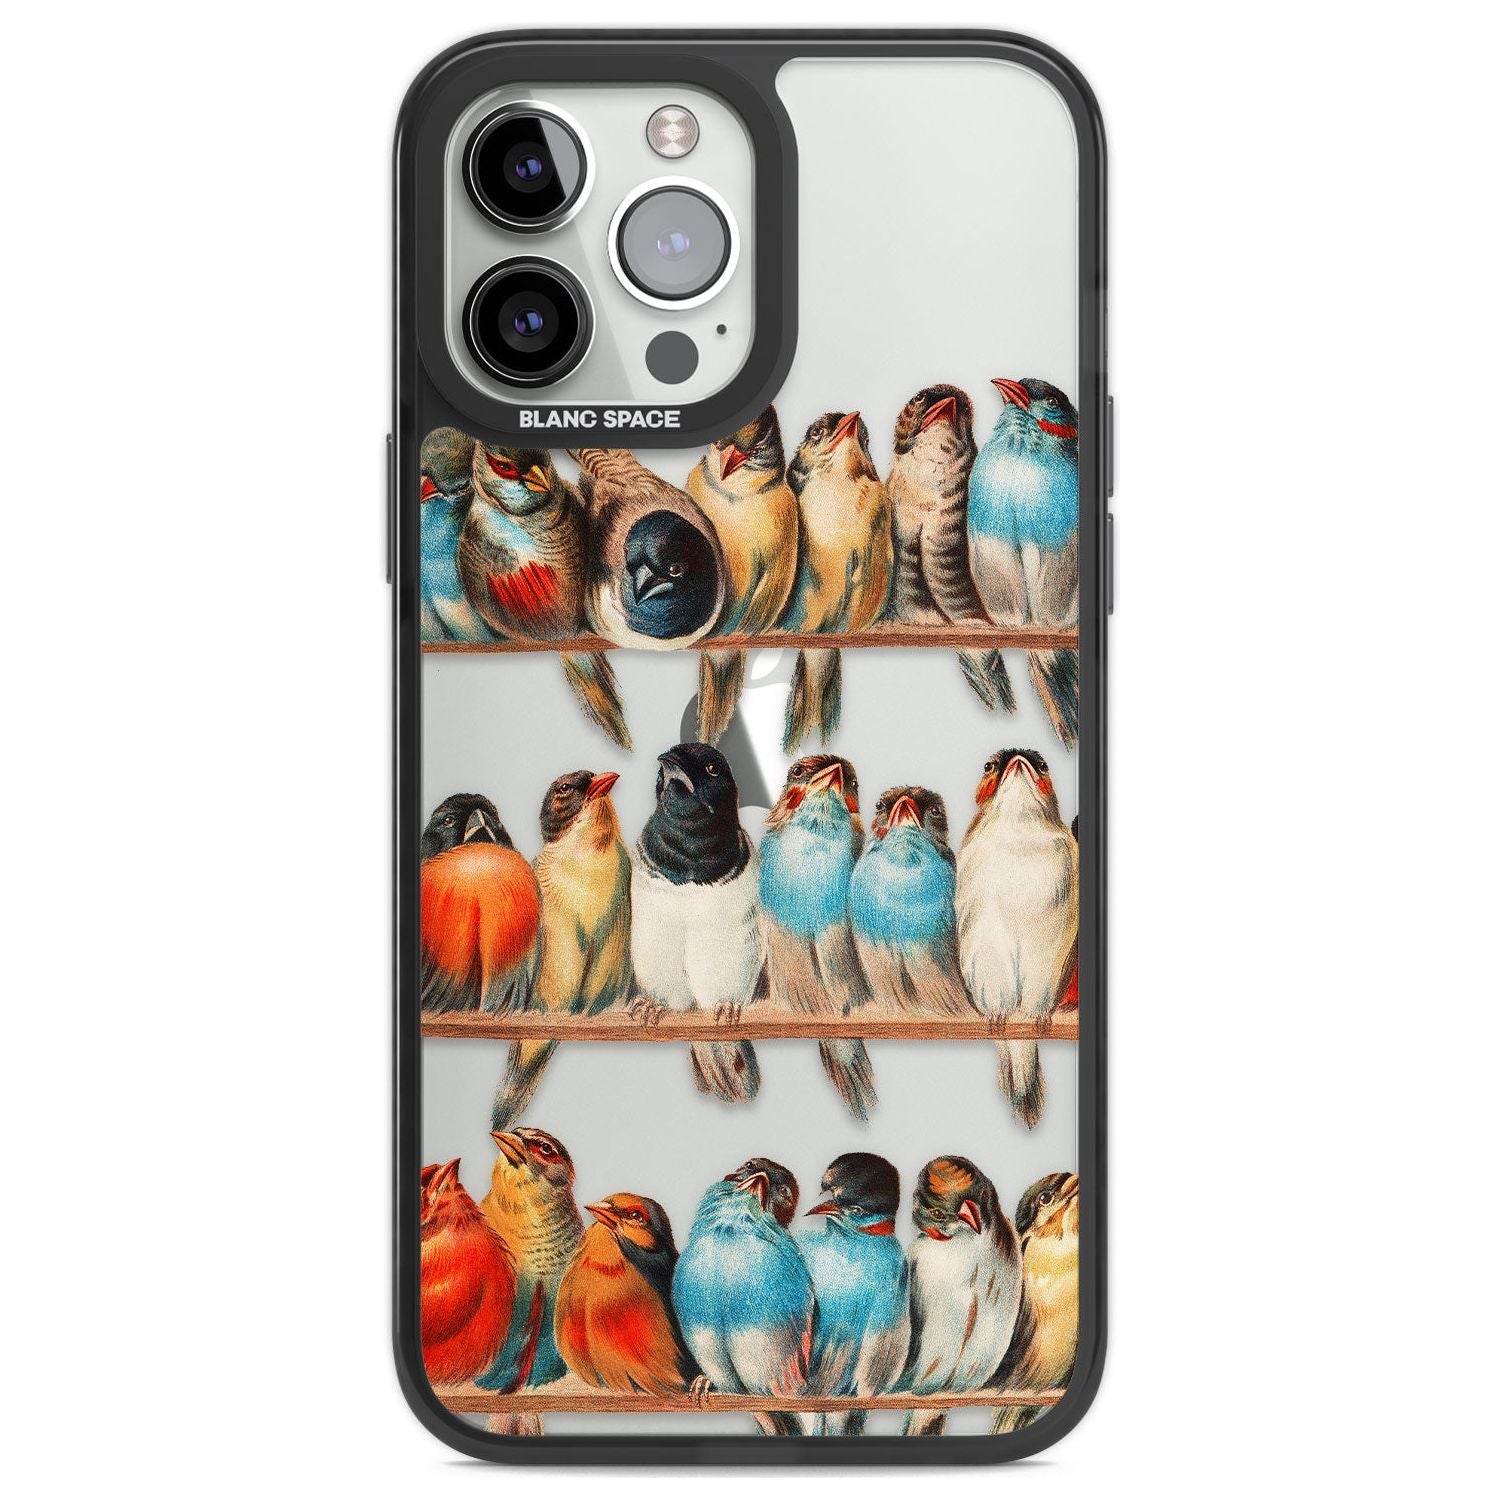 A Perch of Birds Phone Case iPhone 13 Pro Max / Black Impact Case,iPhone 14 Pro Max / Black Impact Case Blanc Space